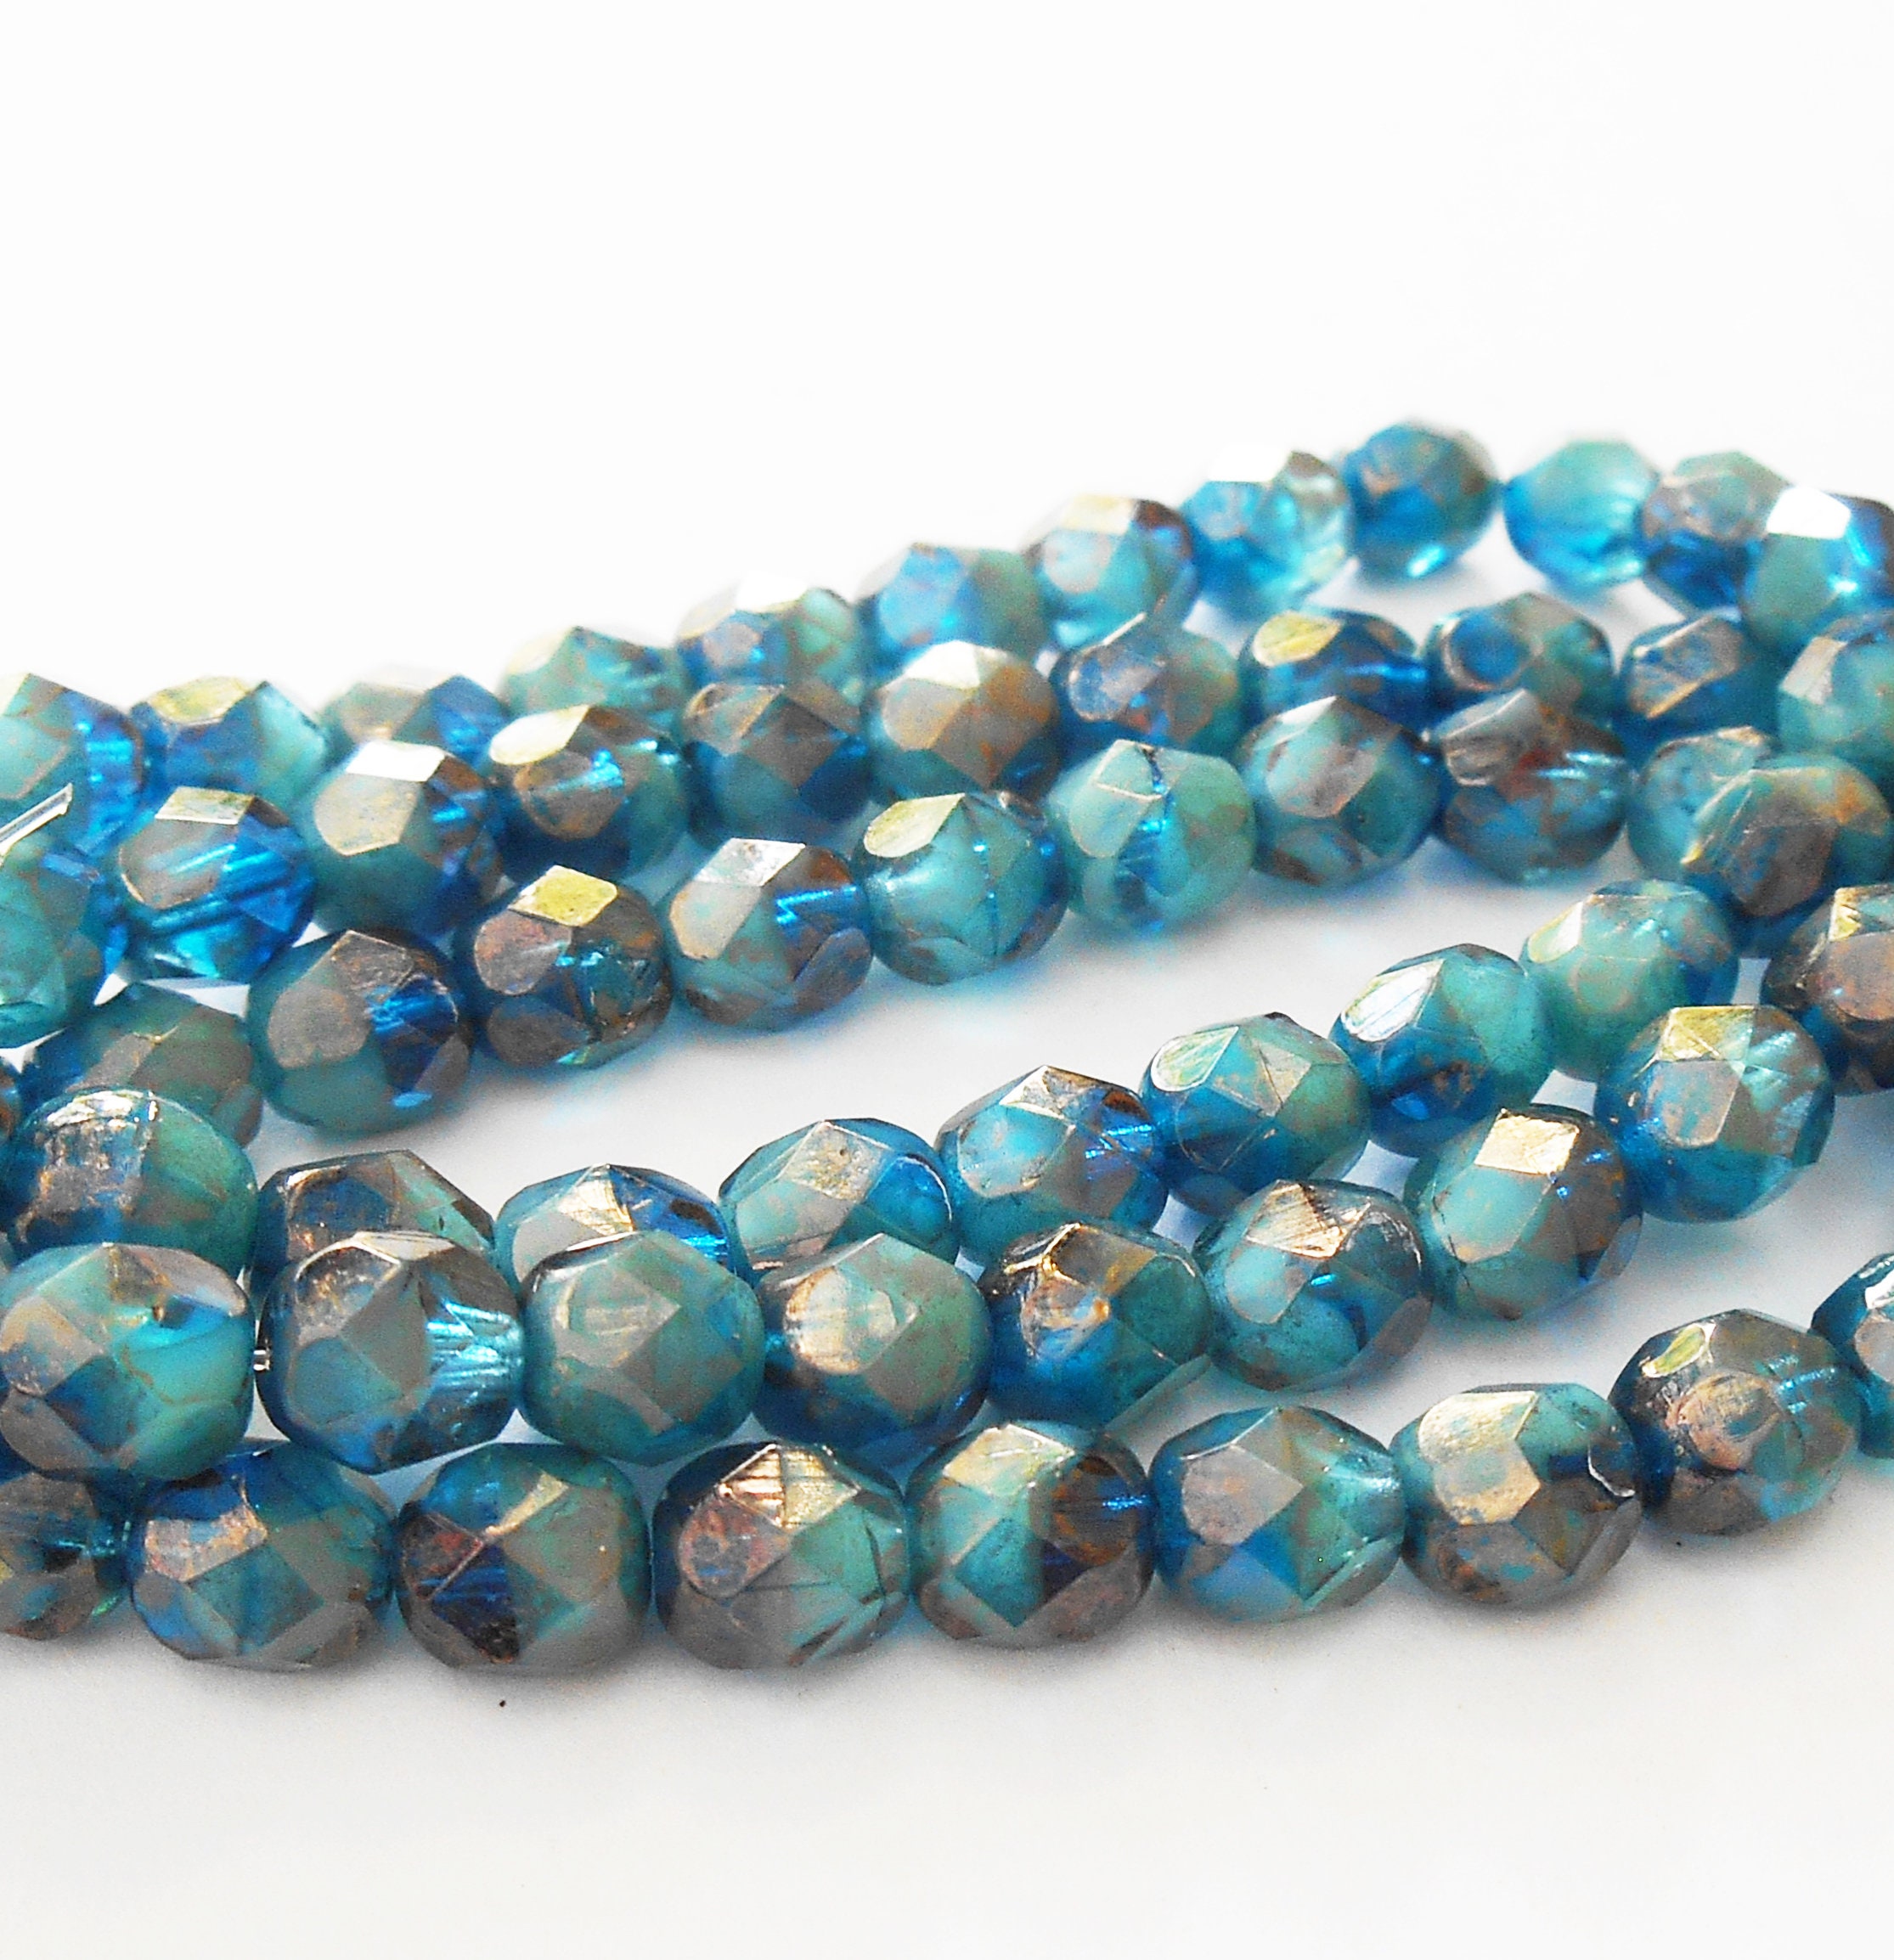 New Lower Price 25 - Pacific Blue Blend 6mm Faceted Fire Polished Round Beads, Capri Czech Republic Glass Beads